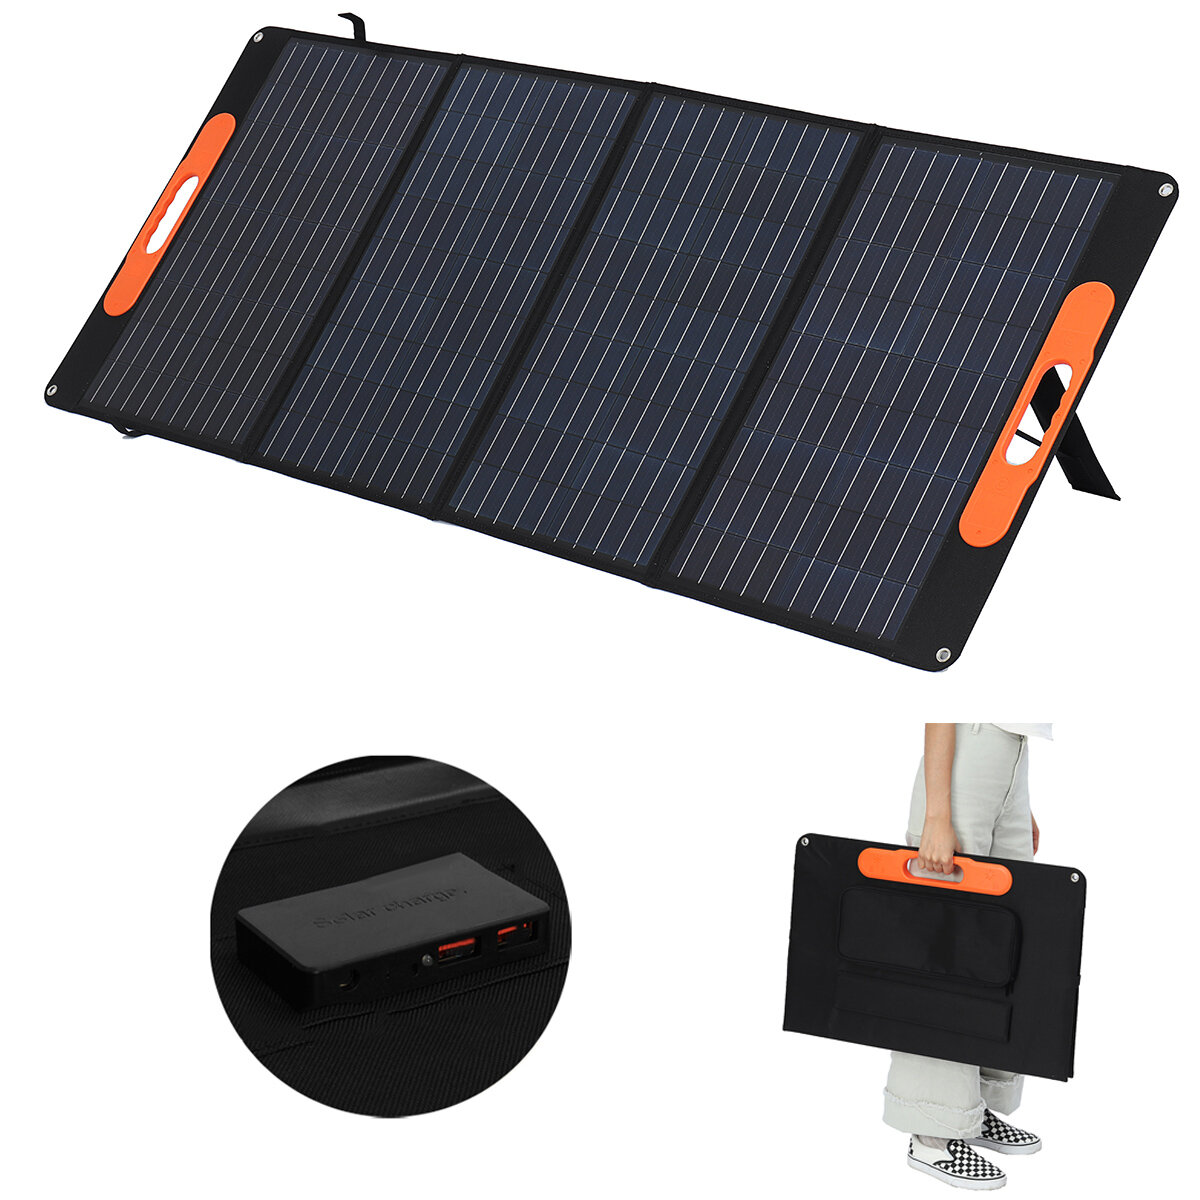 120W Solar Panel Folding Bag 4-in-1 Output Port Portable Solar Power Generation Bag Portable Charging Outdoor Camping Travel